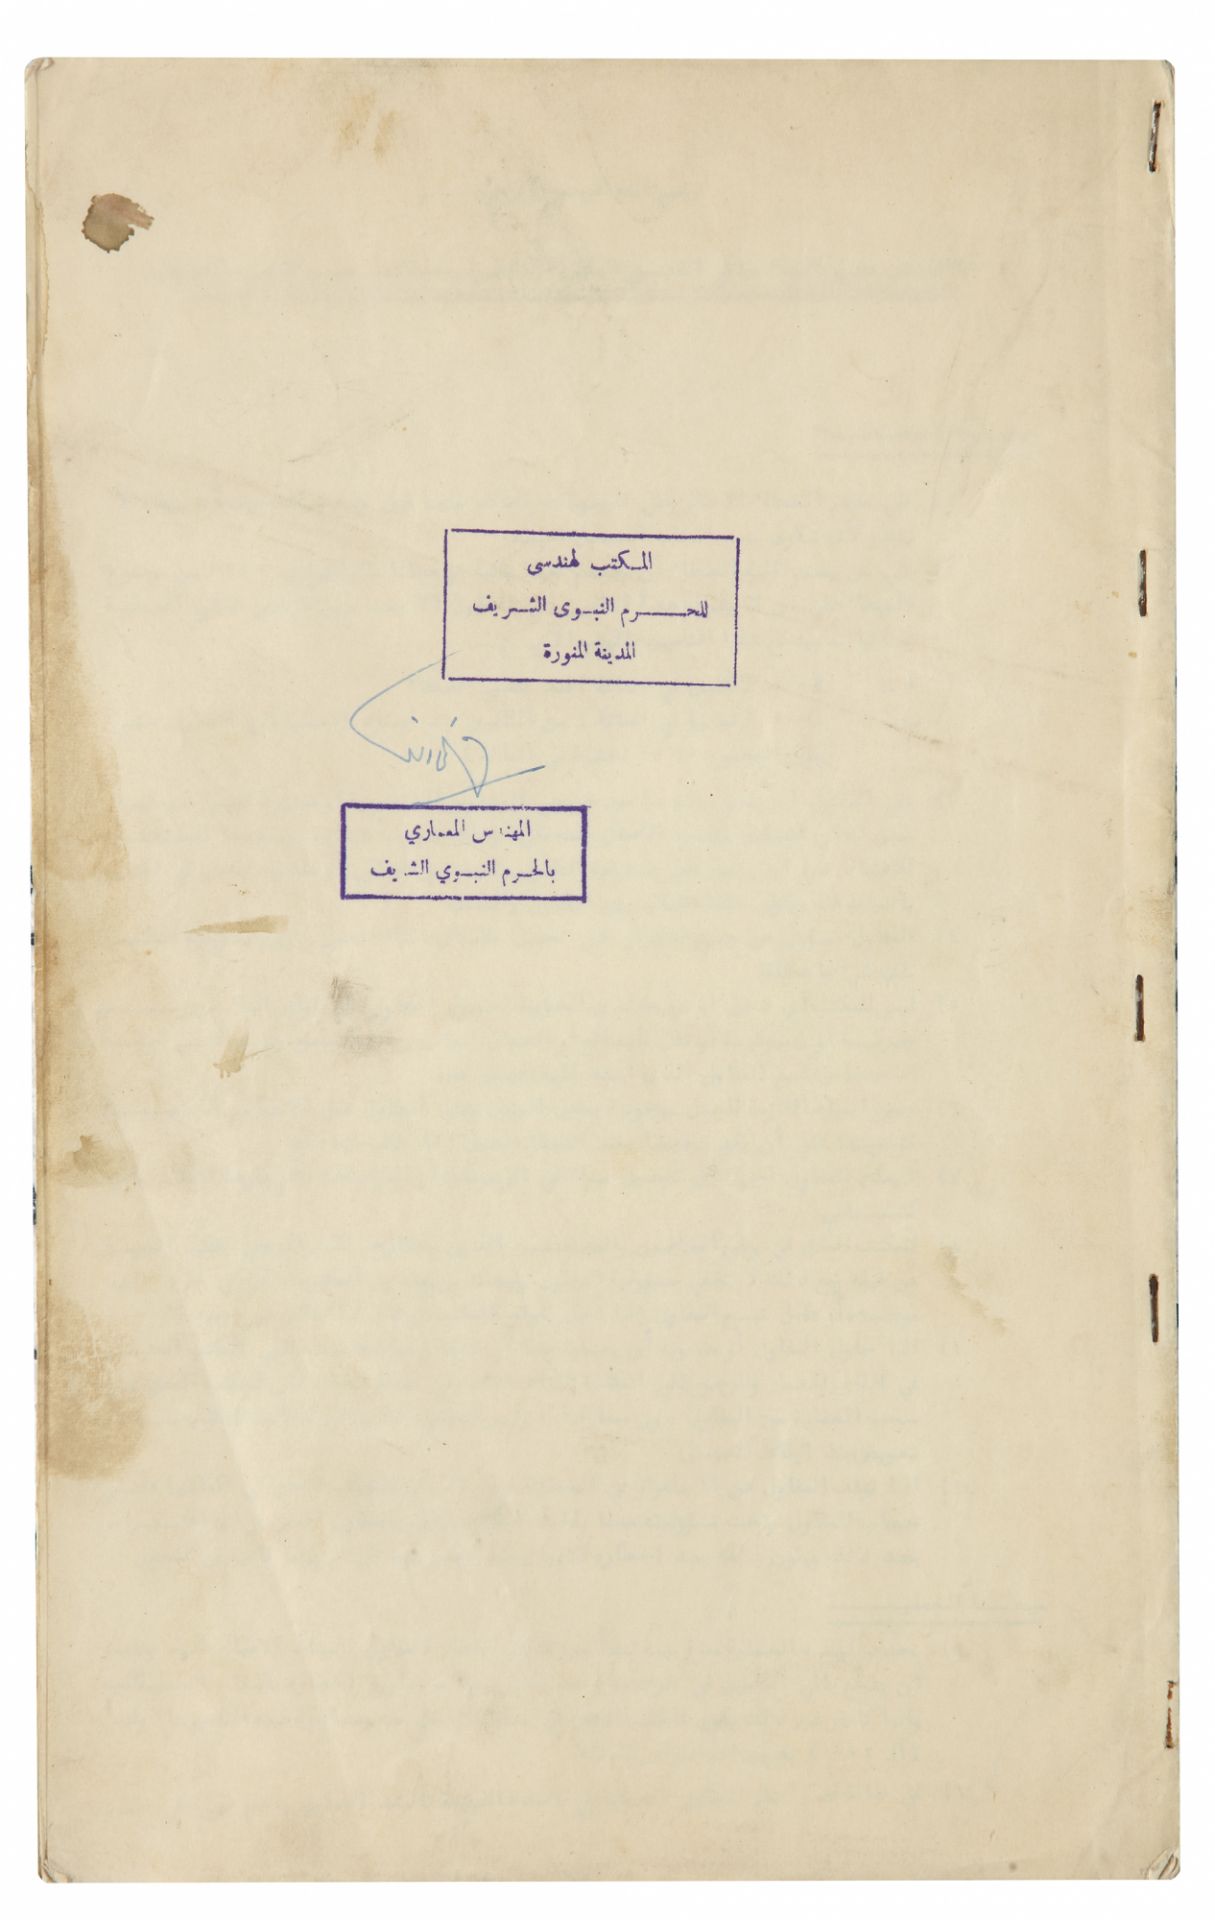 ENGINEERING DRAWINGS REGARDING THE EXPANSION OF THE PROPHET'S MOSQUE 1949 - Image 8 of 10